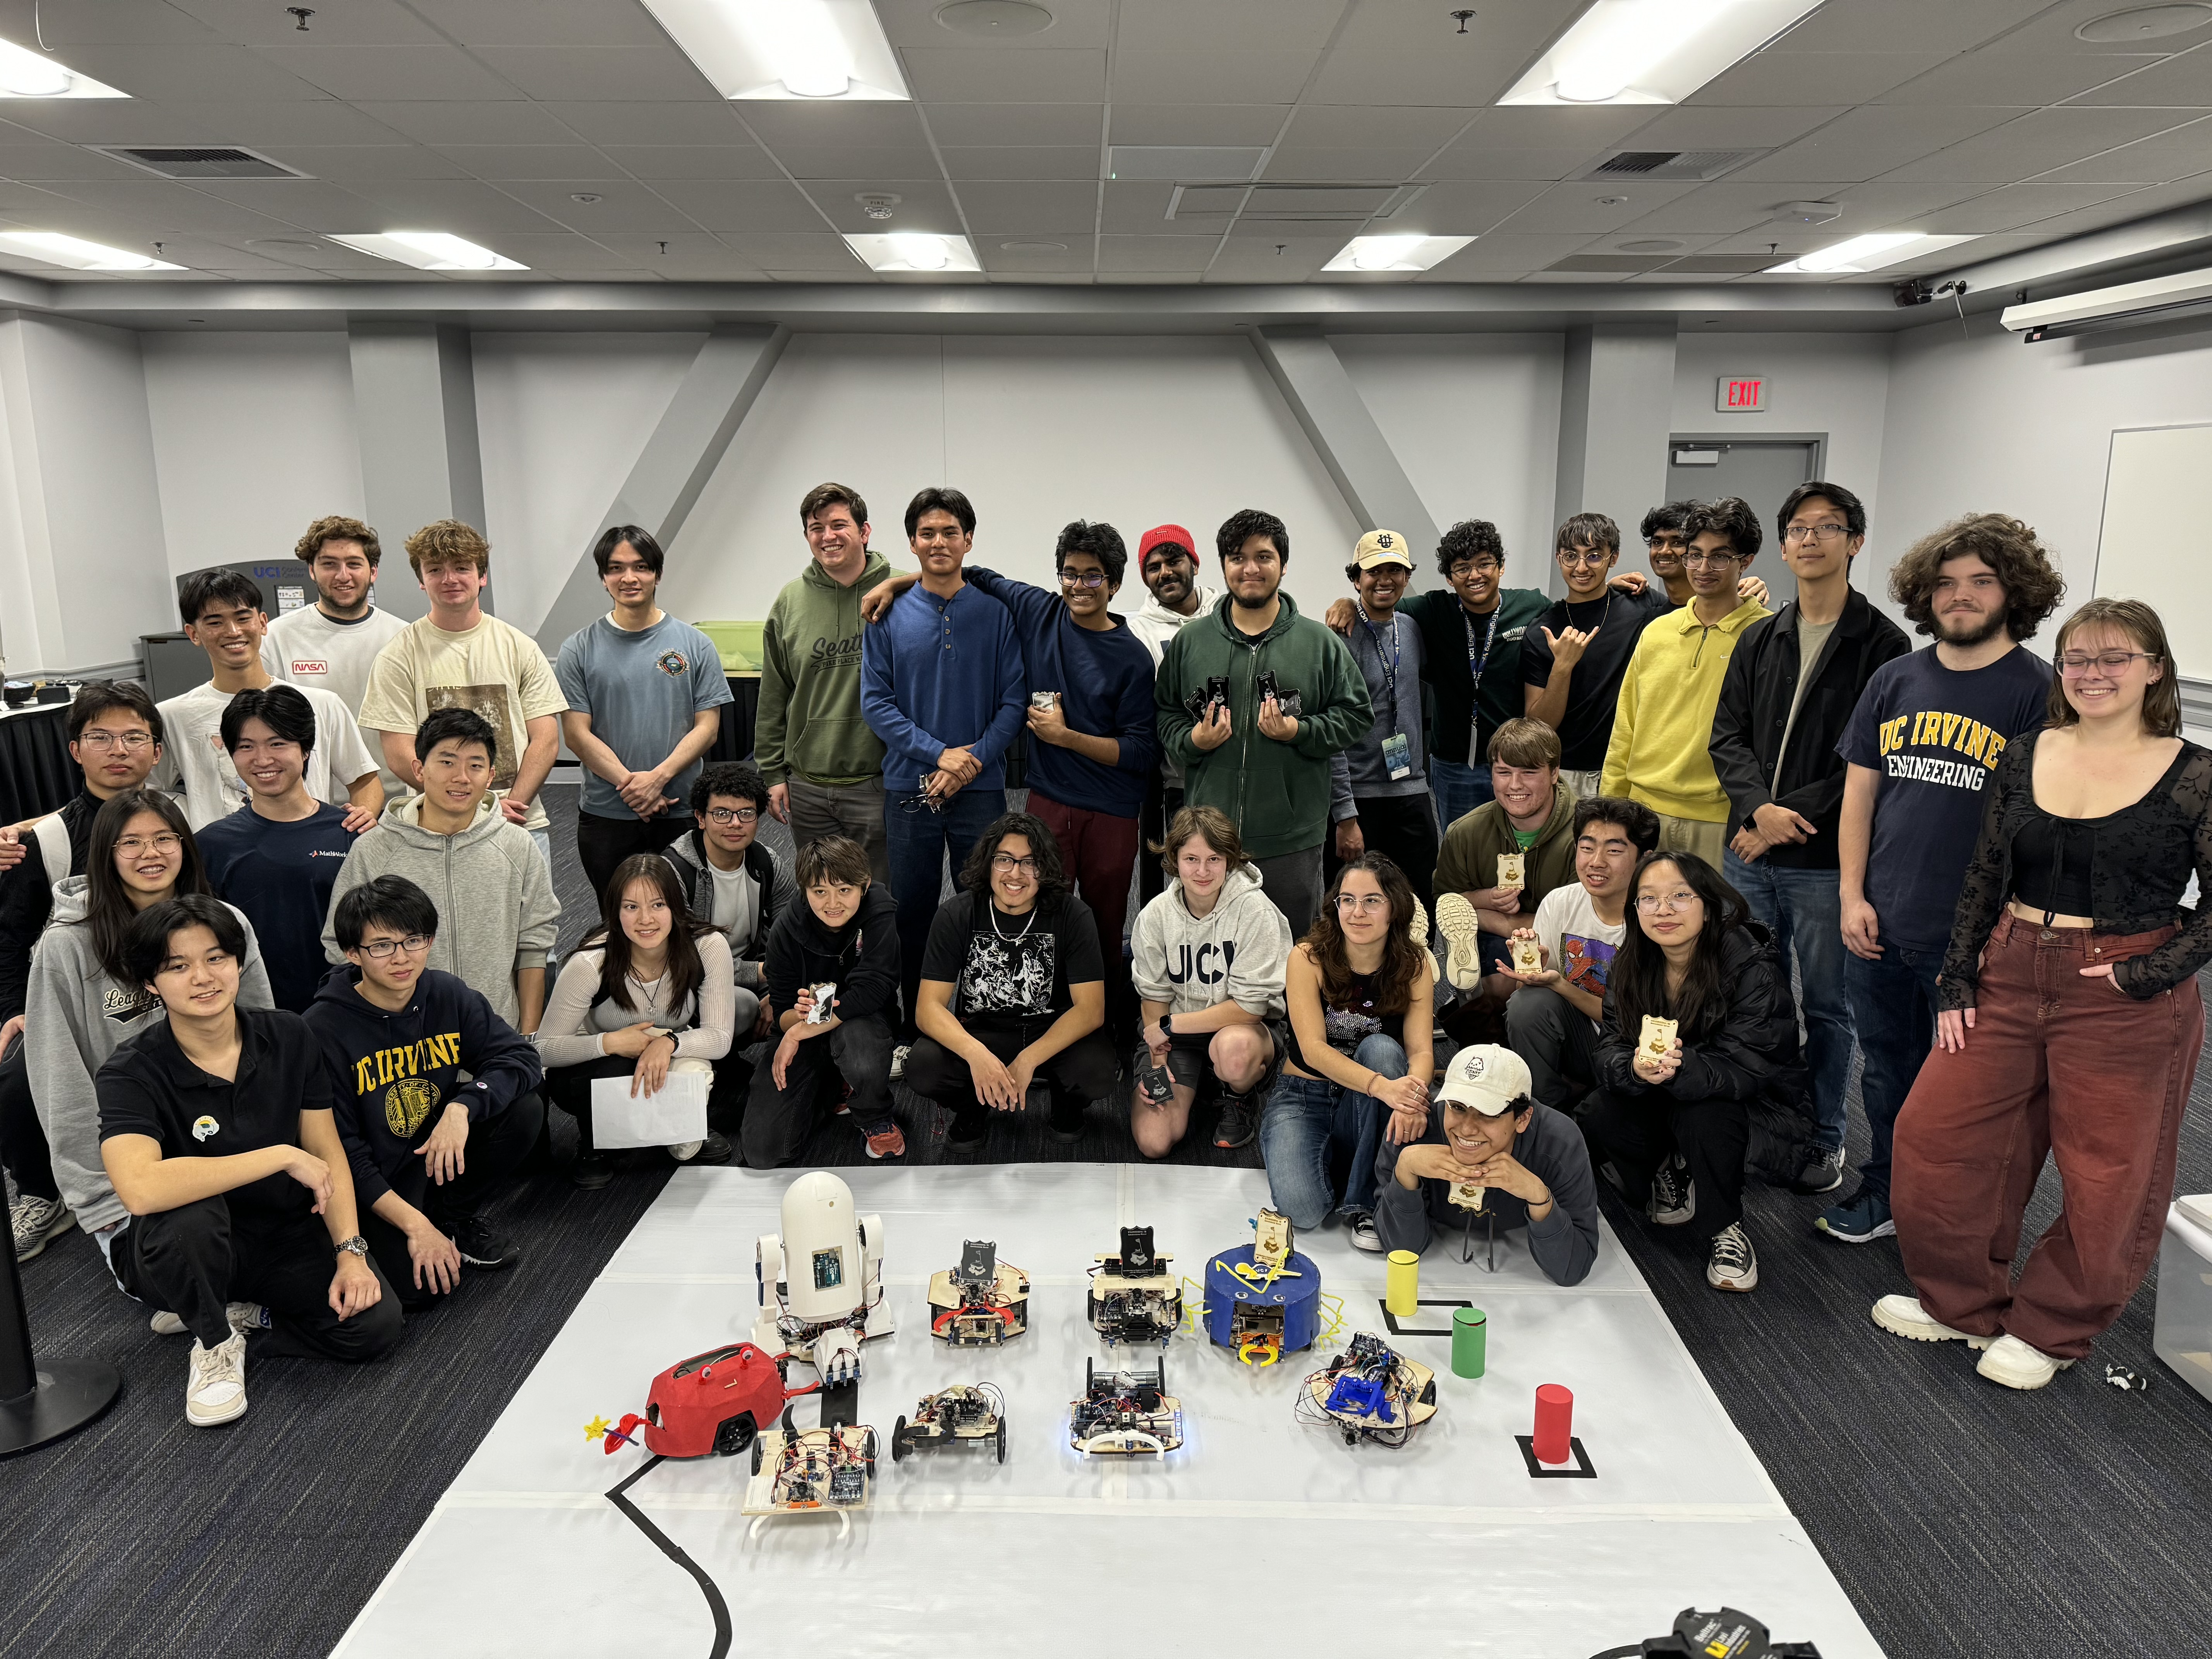 Engineering freshmen participated in the autonomous rover competition, showing off their designs from fall quarter’s introductory engineering course.